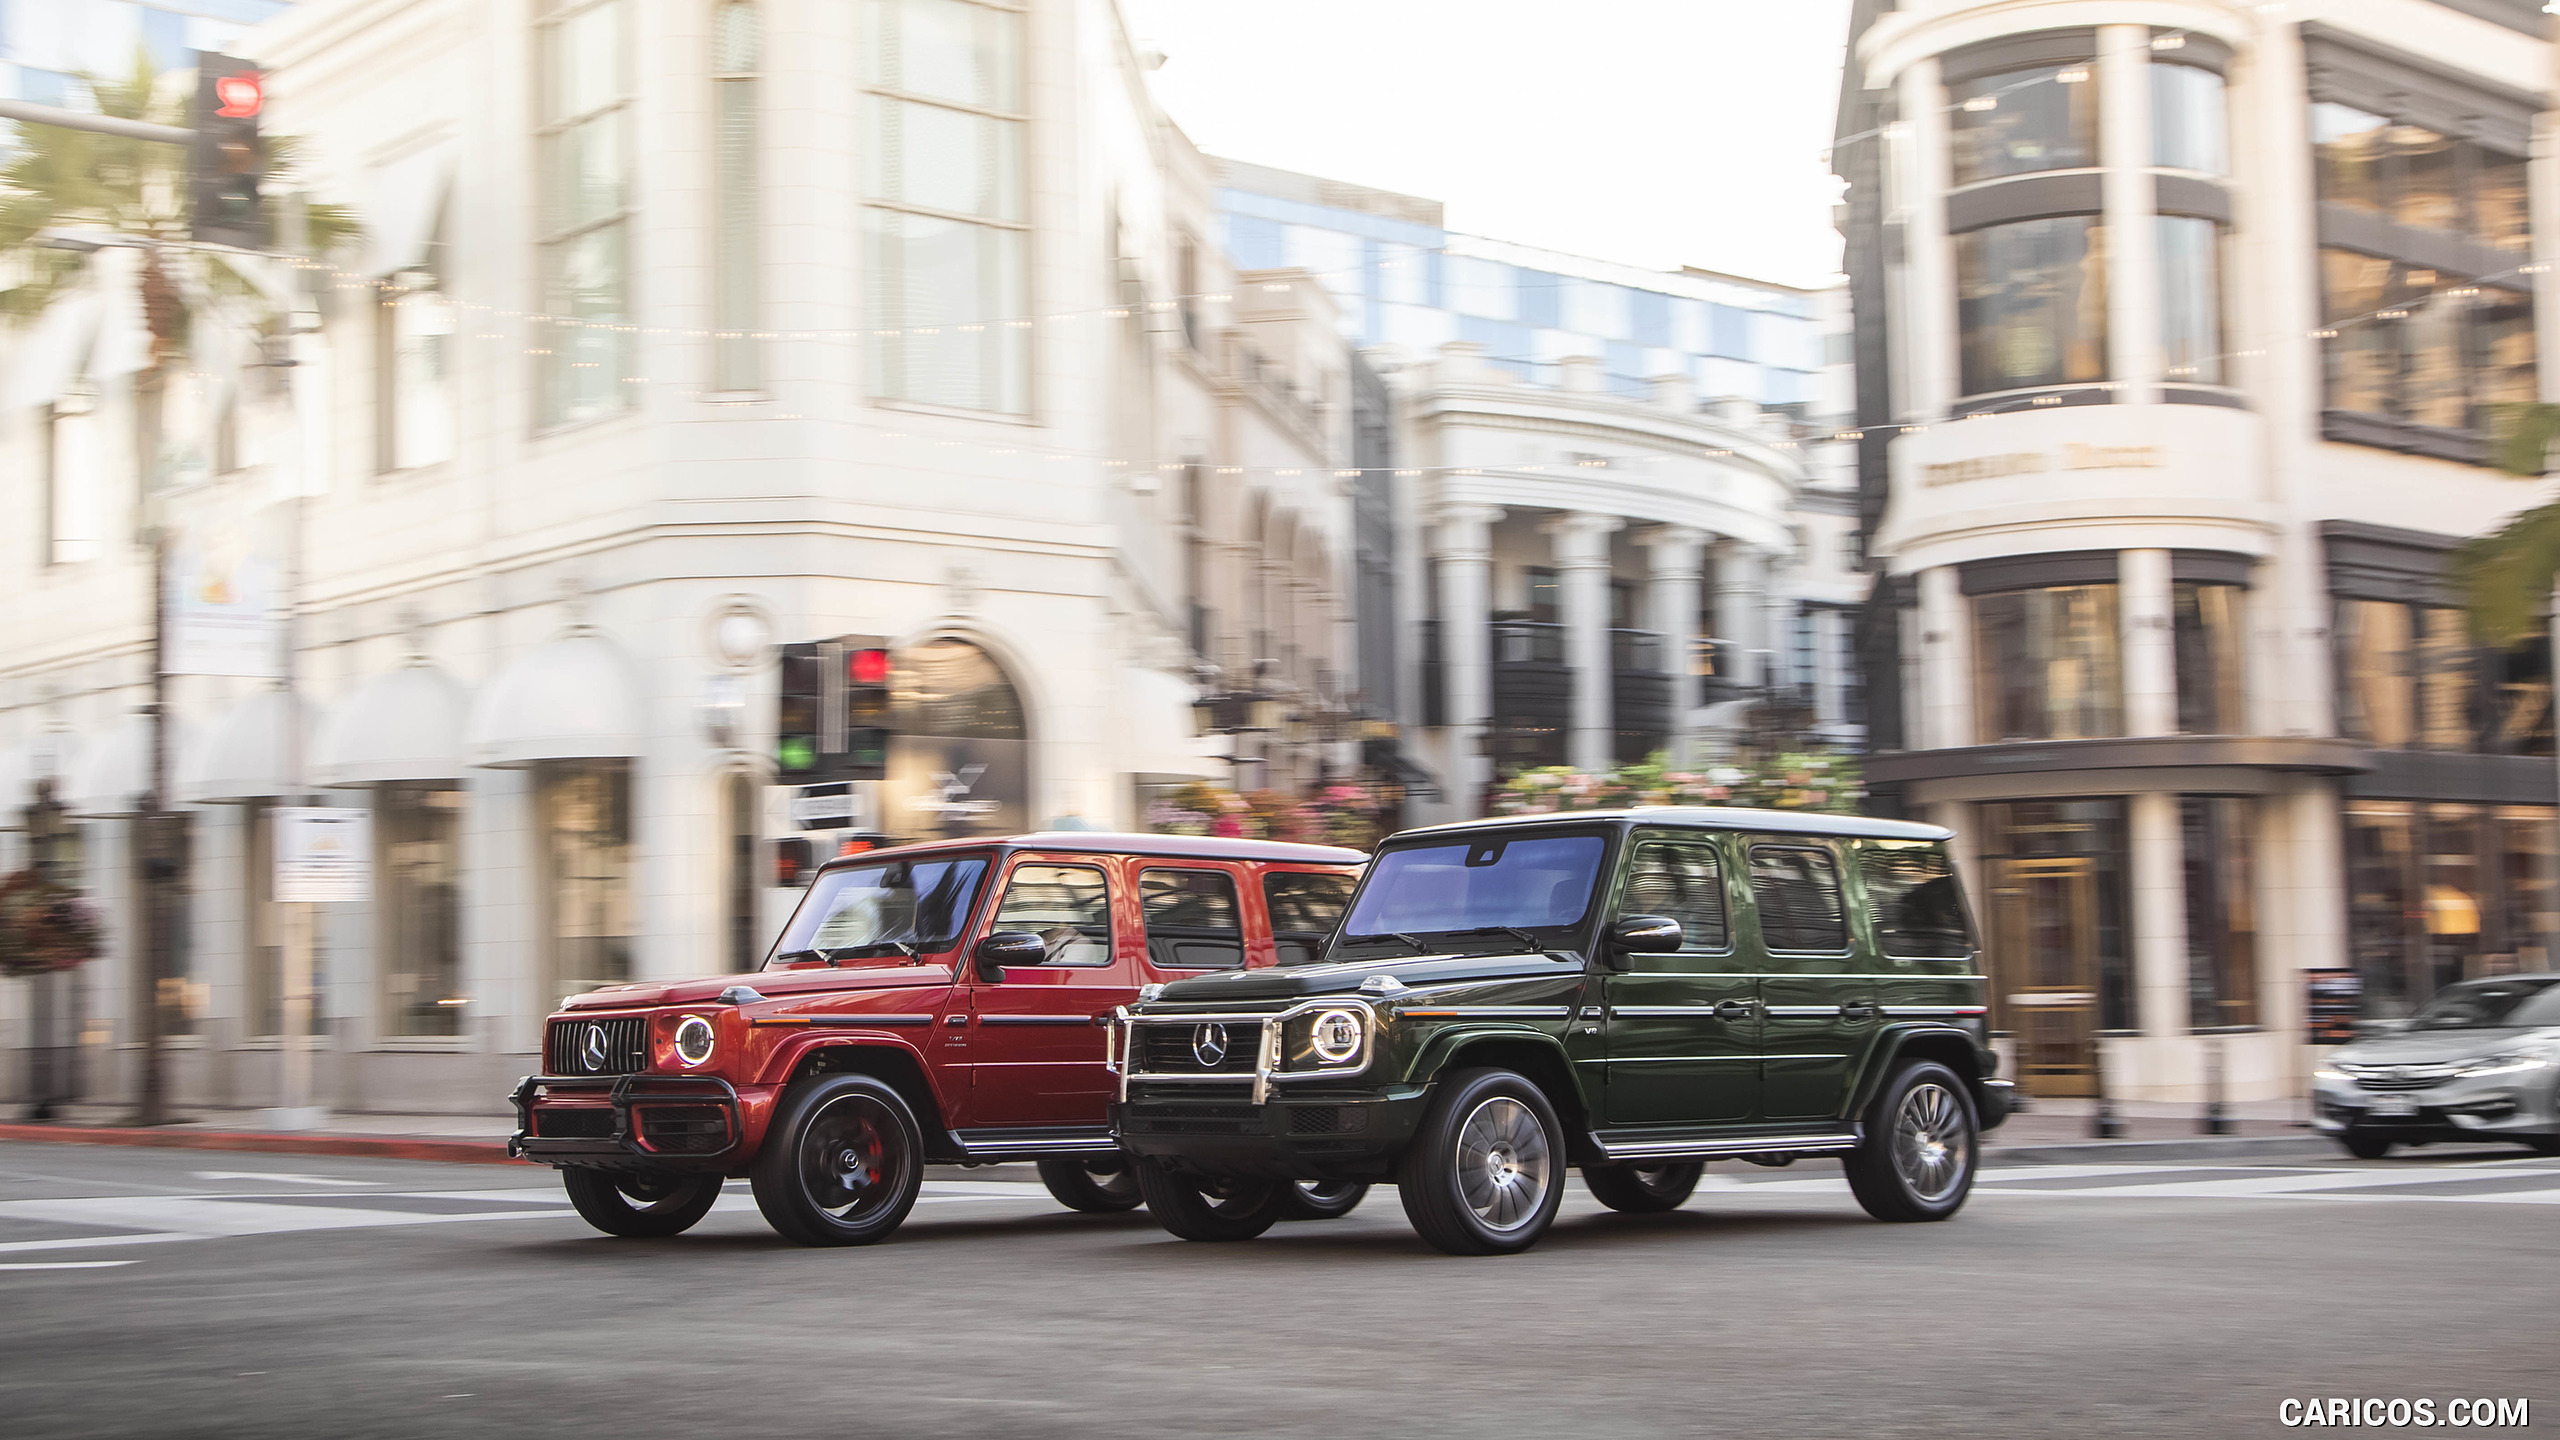 2019 Mercedes-Benz G550 G-Class (U.S.-Spec) and 2019 G63 AMG, #269 of 397